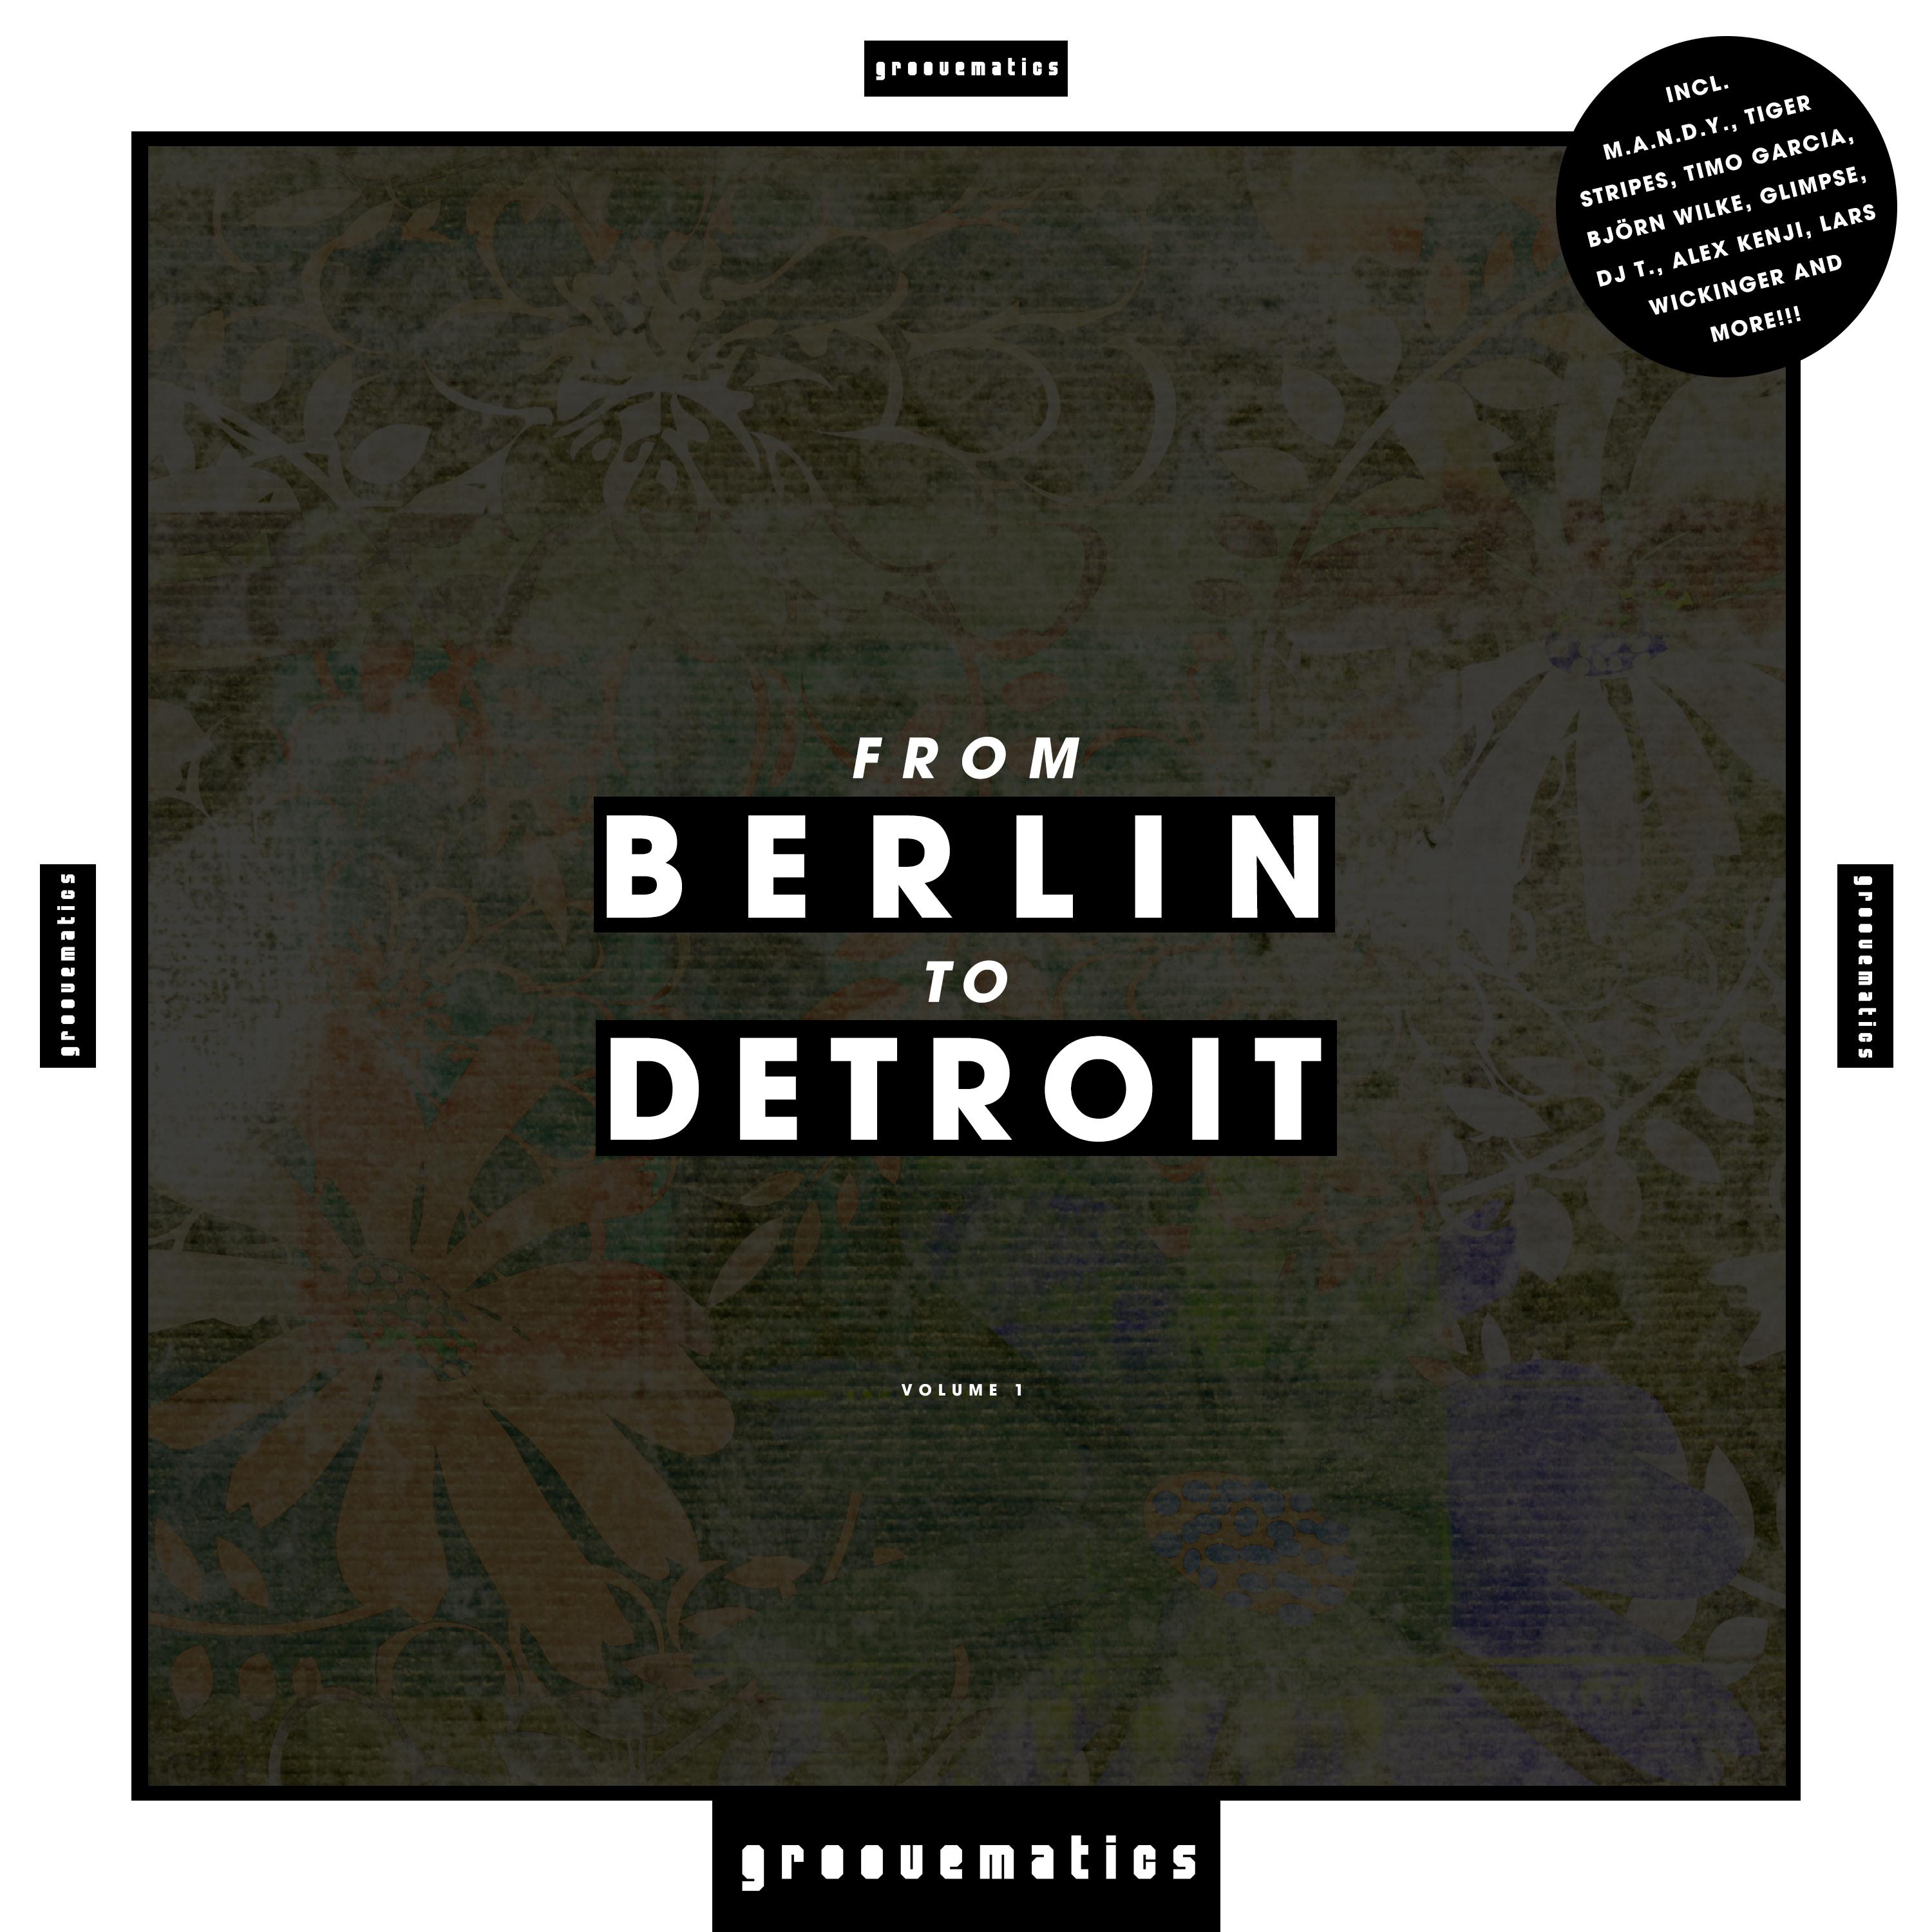 From Berlin to Detroit, Vol. 1